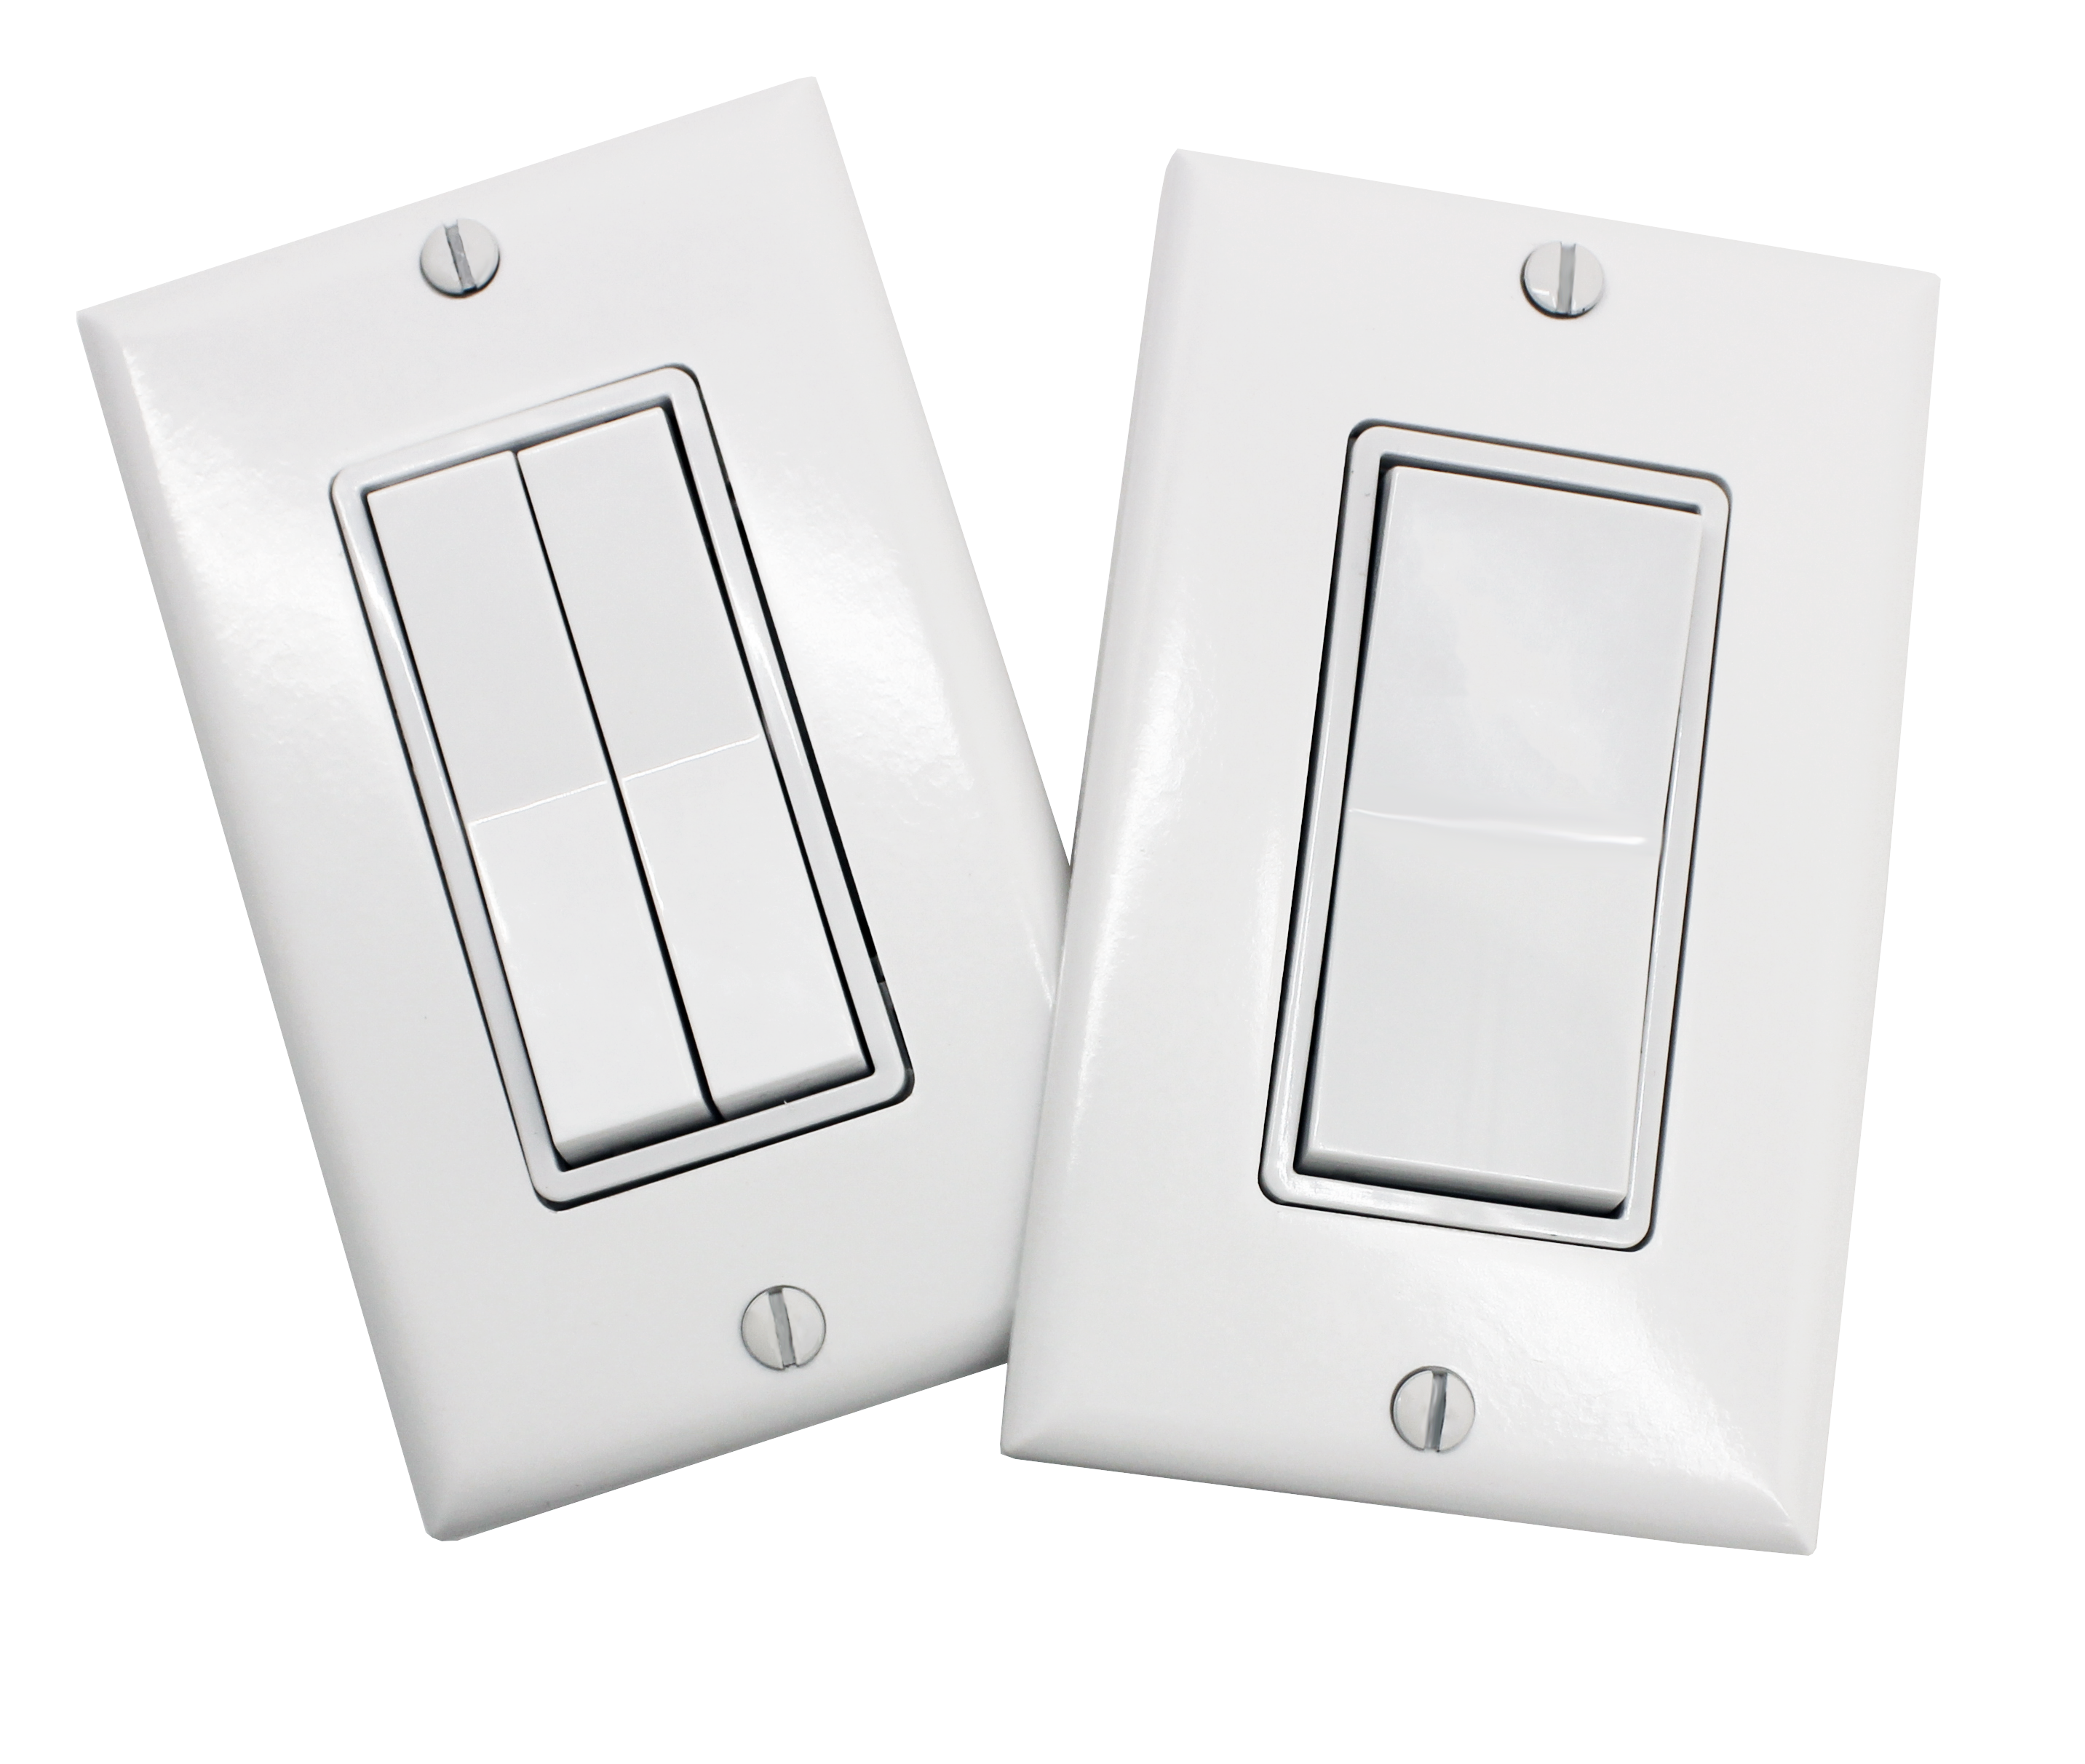 12-24V LED Dual Slide Switch and Dimmer for Standard Wall Switch Box - 120W  Max